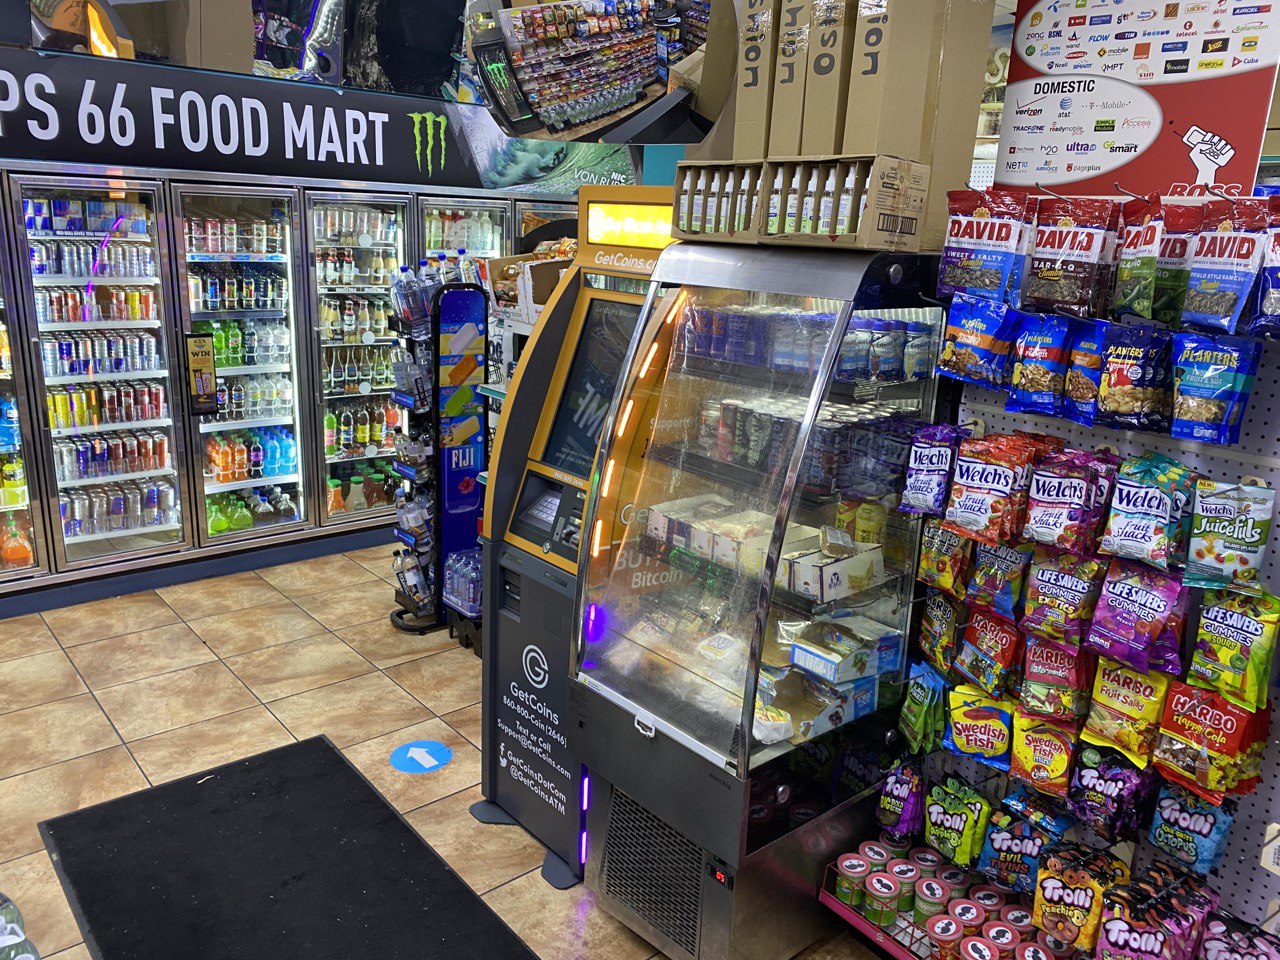 Getcoins - Bitcoin ATM - Inside of Phillips 66 in Paterson, New Jersey